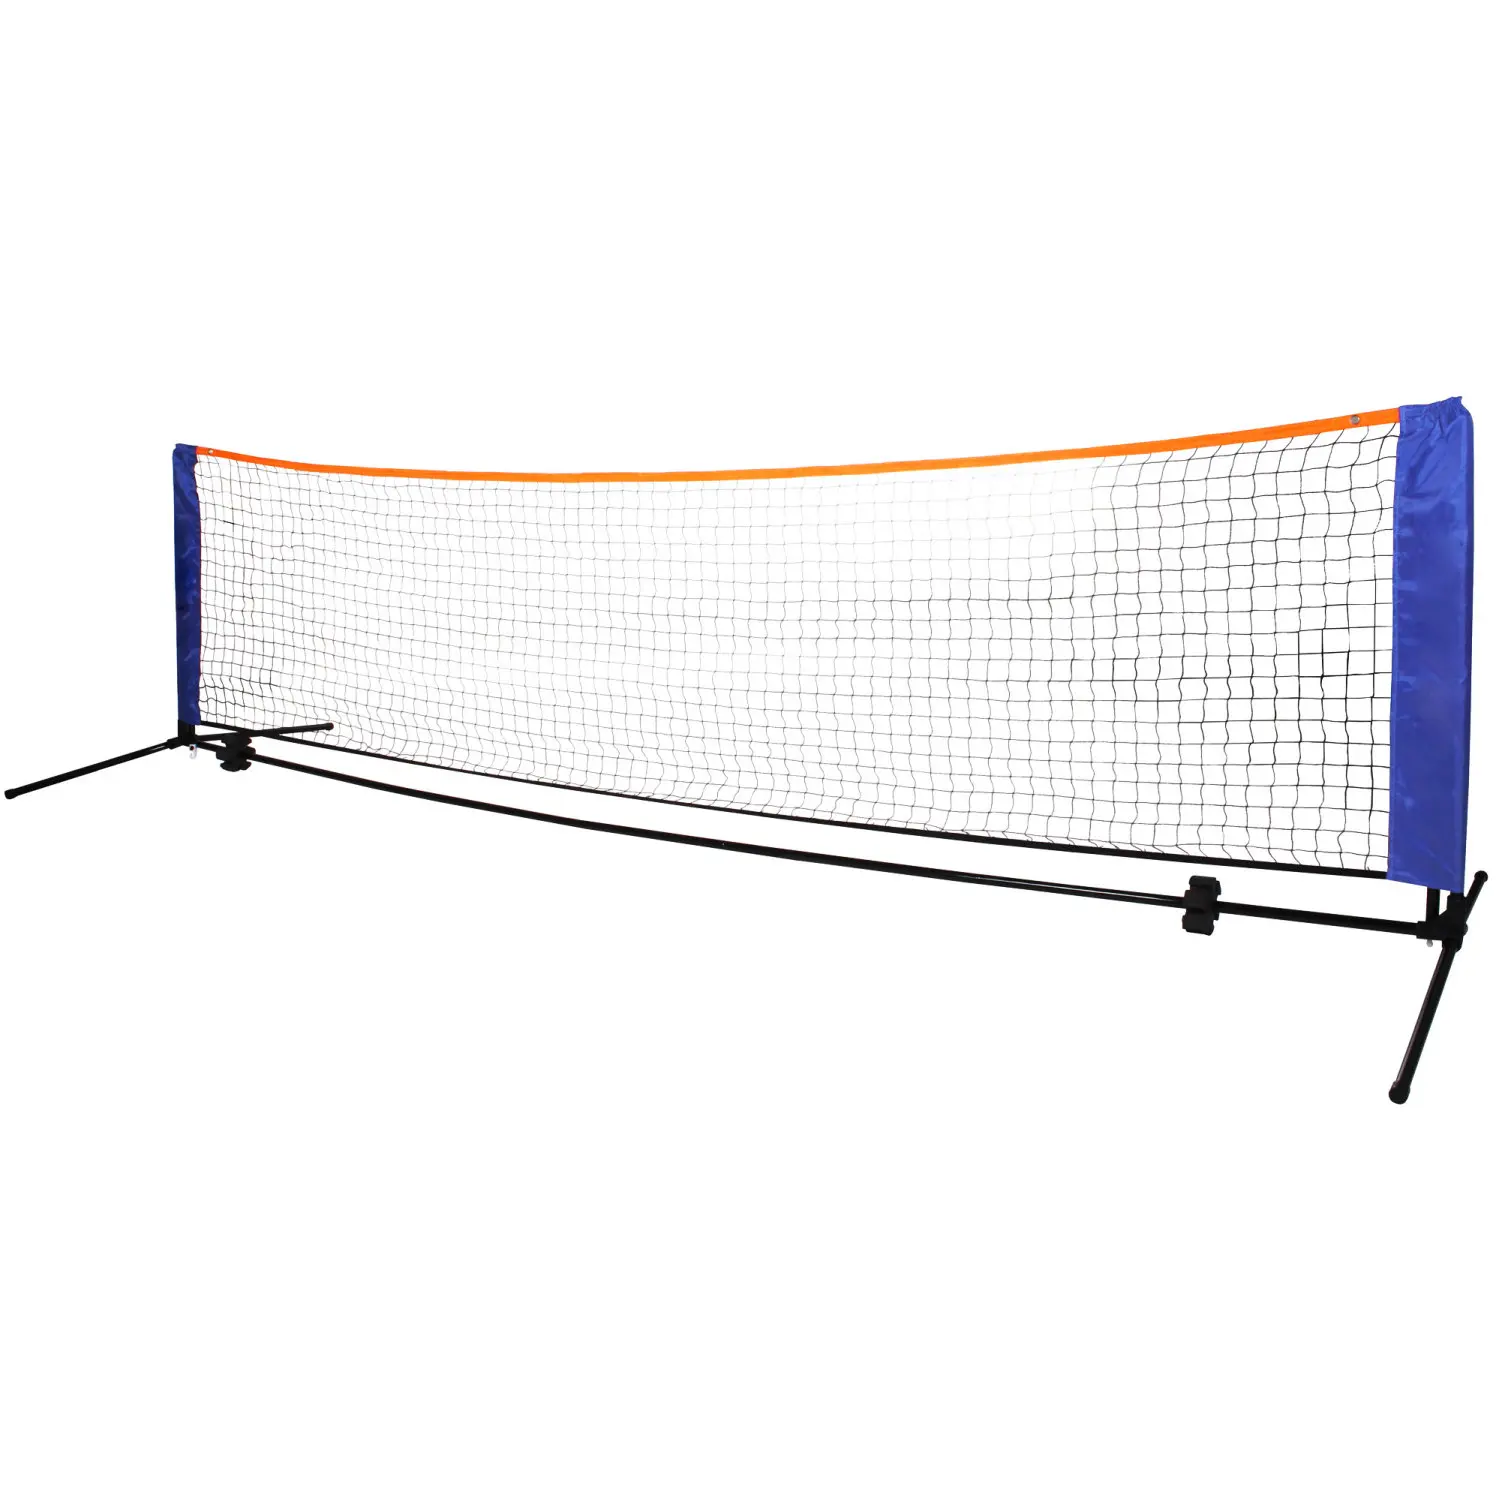 tennis net available in 4m or 5m height adjustable CHUANGJIE Badminton net stable iron frame and transport bag 